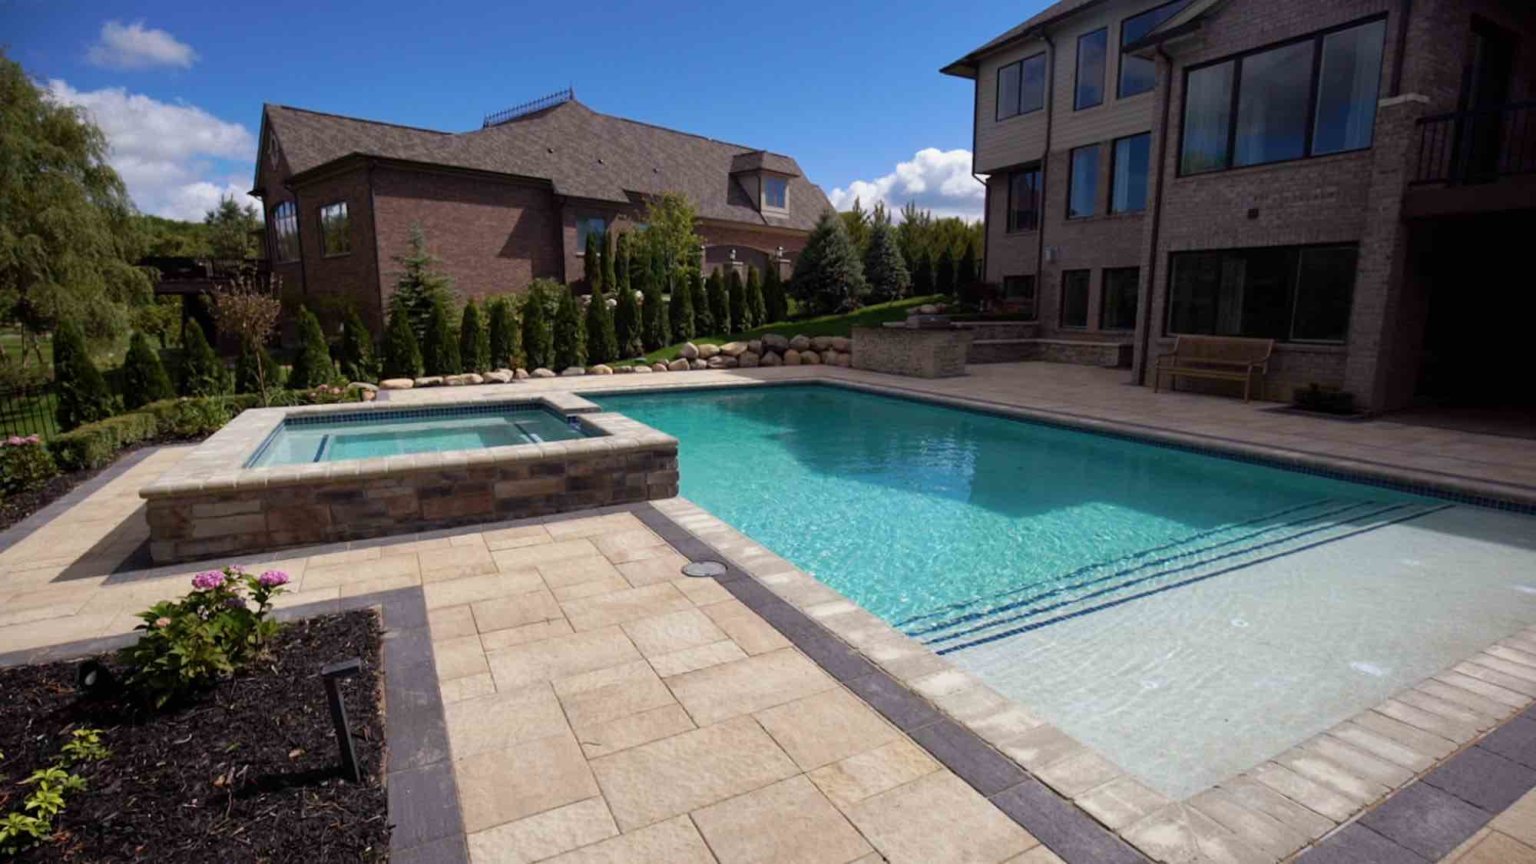 landscape design, michigan pool design, paving company in Michigan, inground pool, pool inspo, backyard pool, pavers, pavers near me, swim and spa, swimming pool design and install, backyard ideas, privacy fence ideas, backyard landscaping ideas, inground pool ideas, gunite pools, pool lights, led pool lights, unilock, Oakland County pavers, pavers near me, pool design, patio paving Oakland County, patio pavers near me, unilock contractors inground pool with raised spa spillover spa